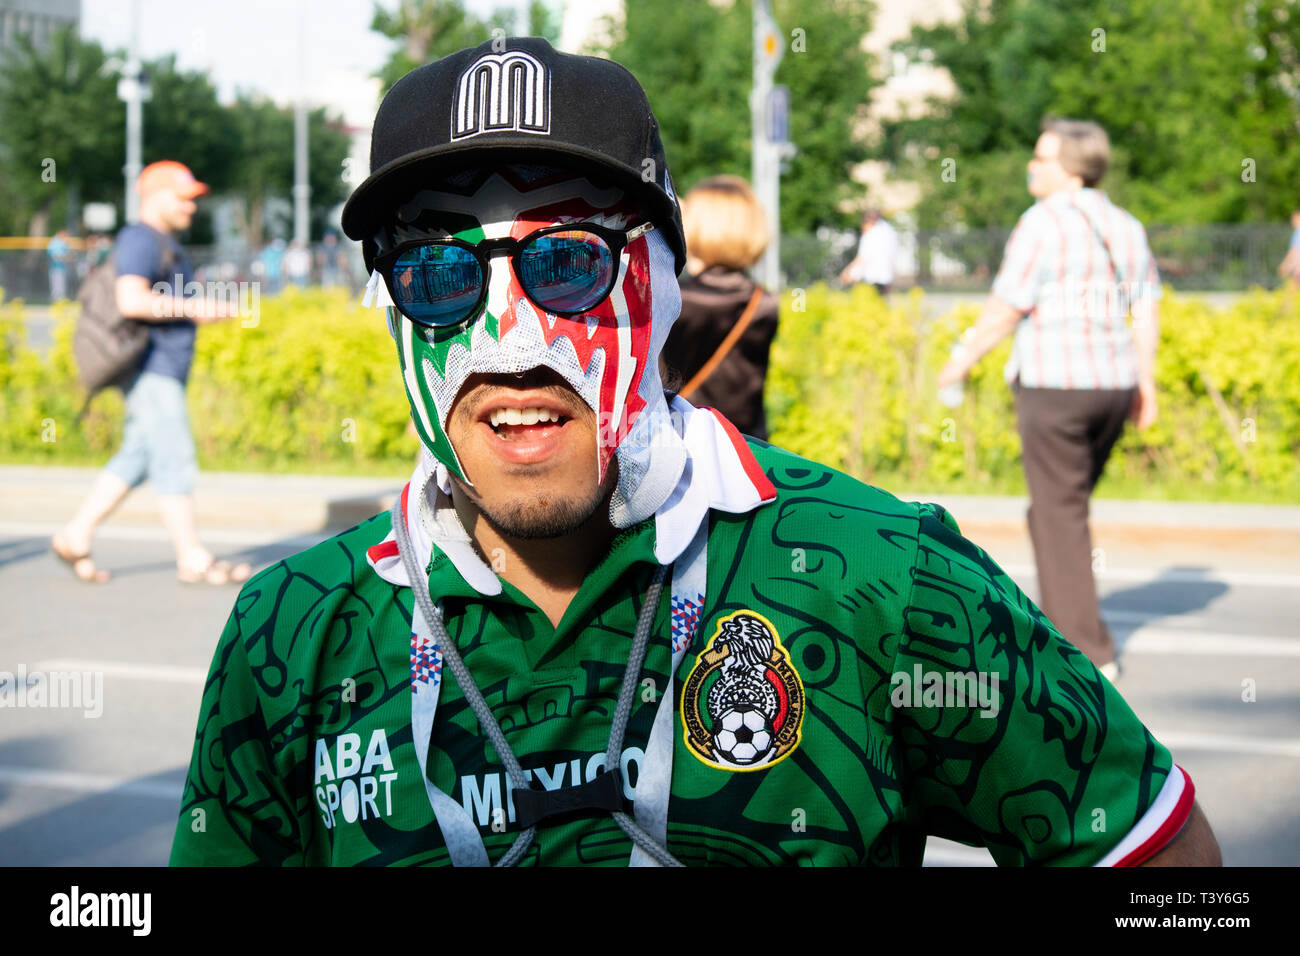 Mexican fan with Mexican wrestling mask, baseball hat and sunglasses looking to camera - FIFA World Cup Russia 2018 Mexico v Sweden, Ekaterinburg Stock Photo